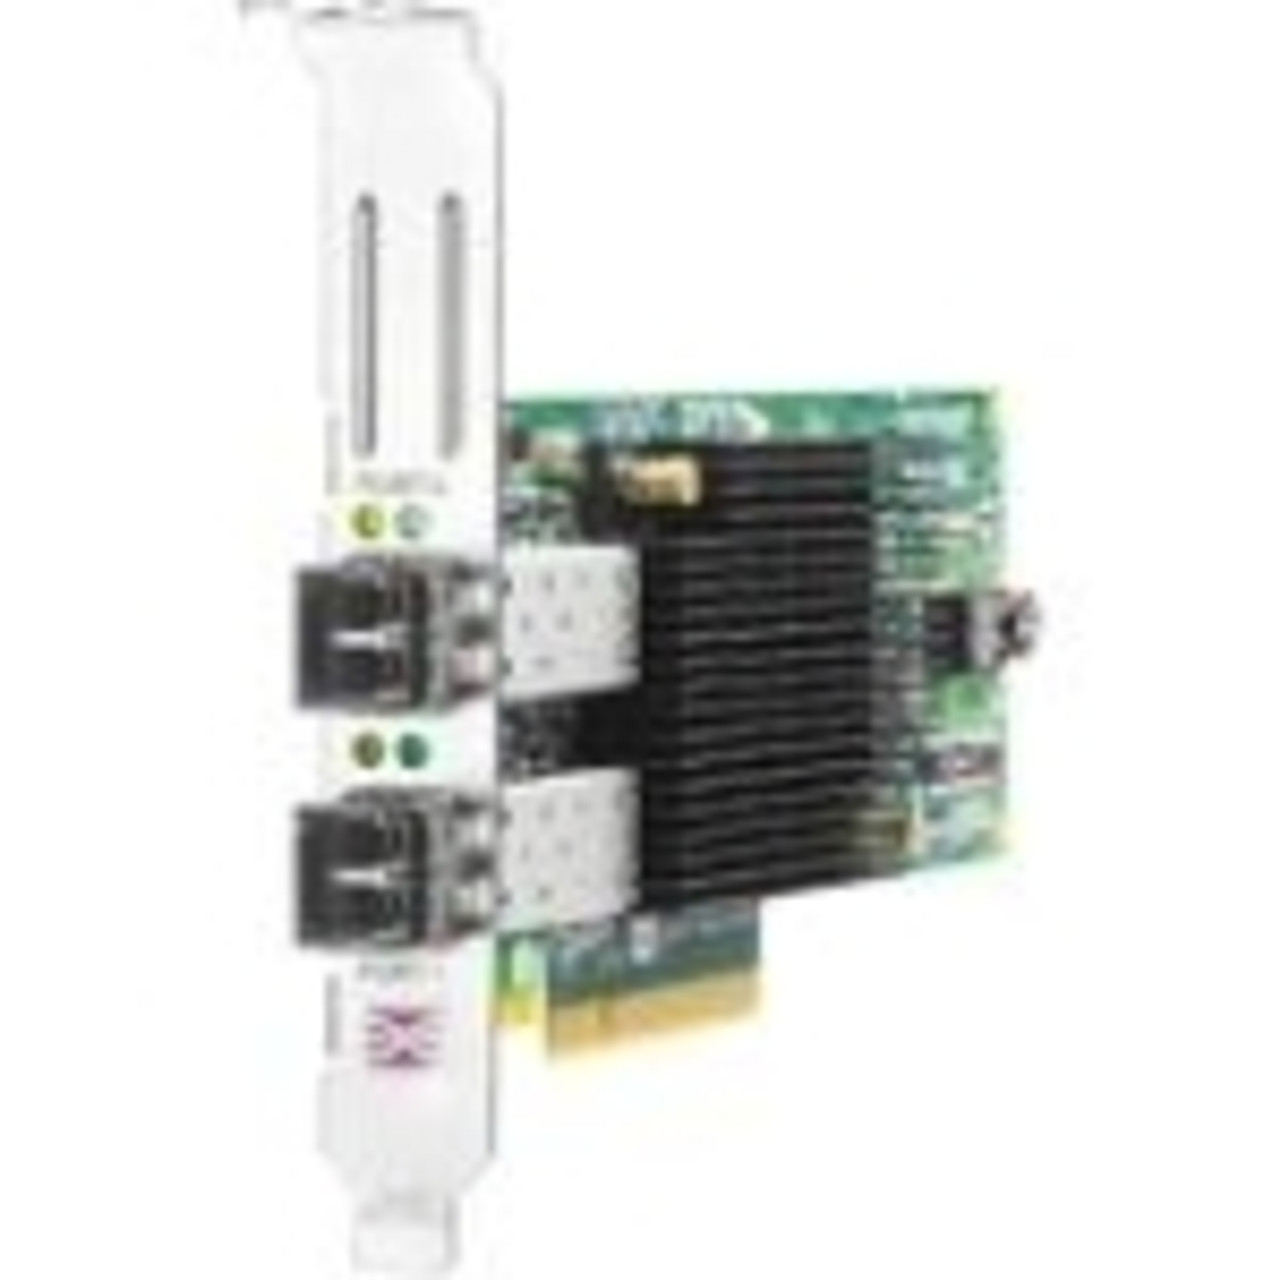 AJ763BR HP Storageworks 82E Dual-Ports LC 8.5Gbps Fibre Channel PCI Express 2.0 x4 / PCI Express x8 Host Bus Network Adapter